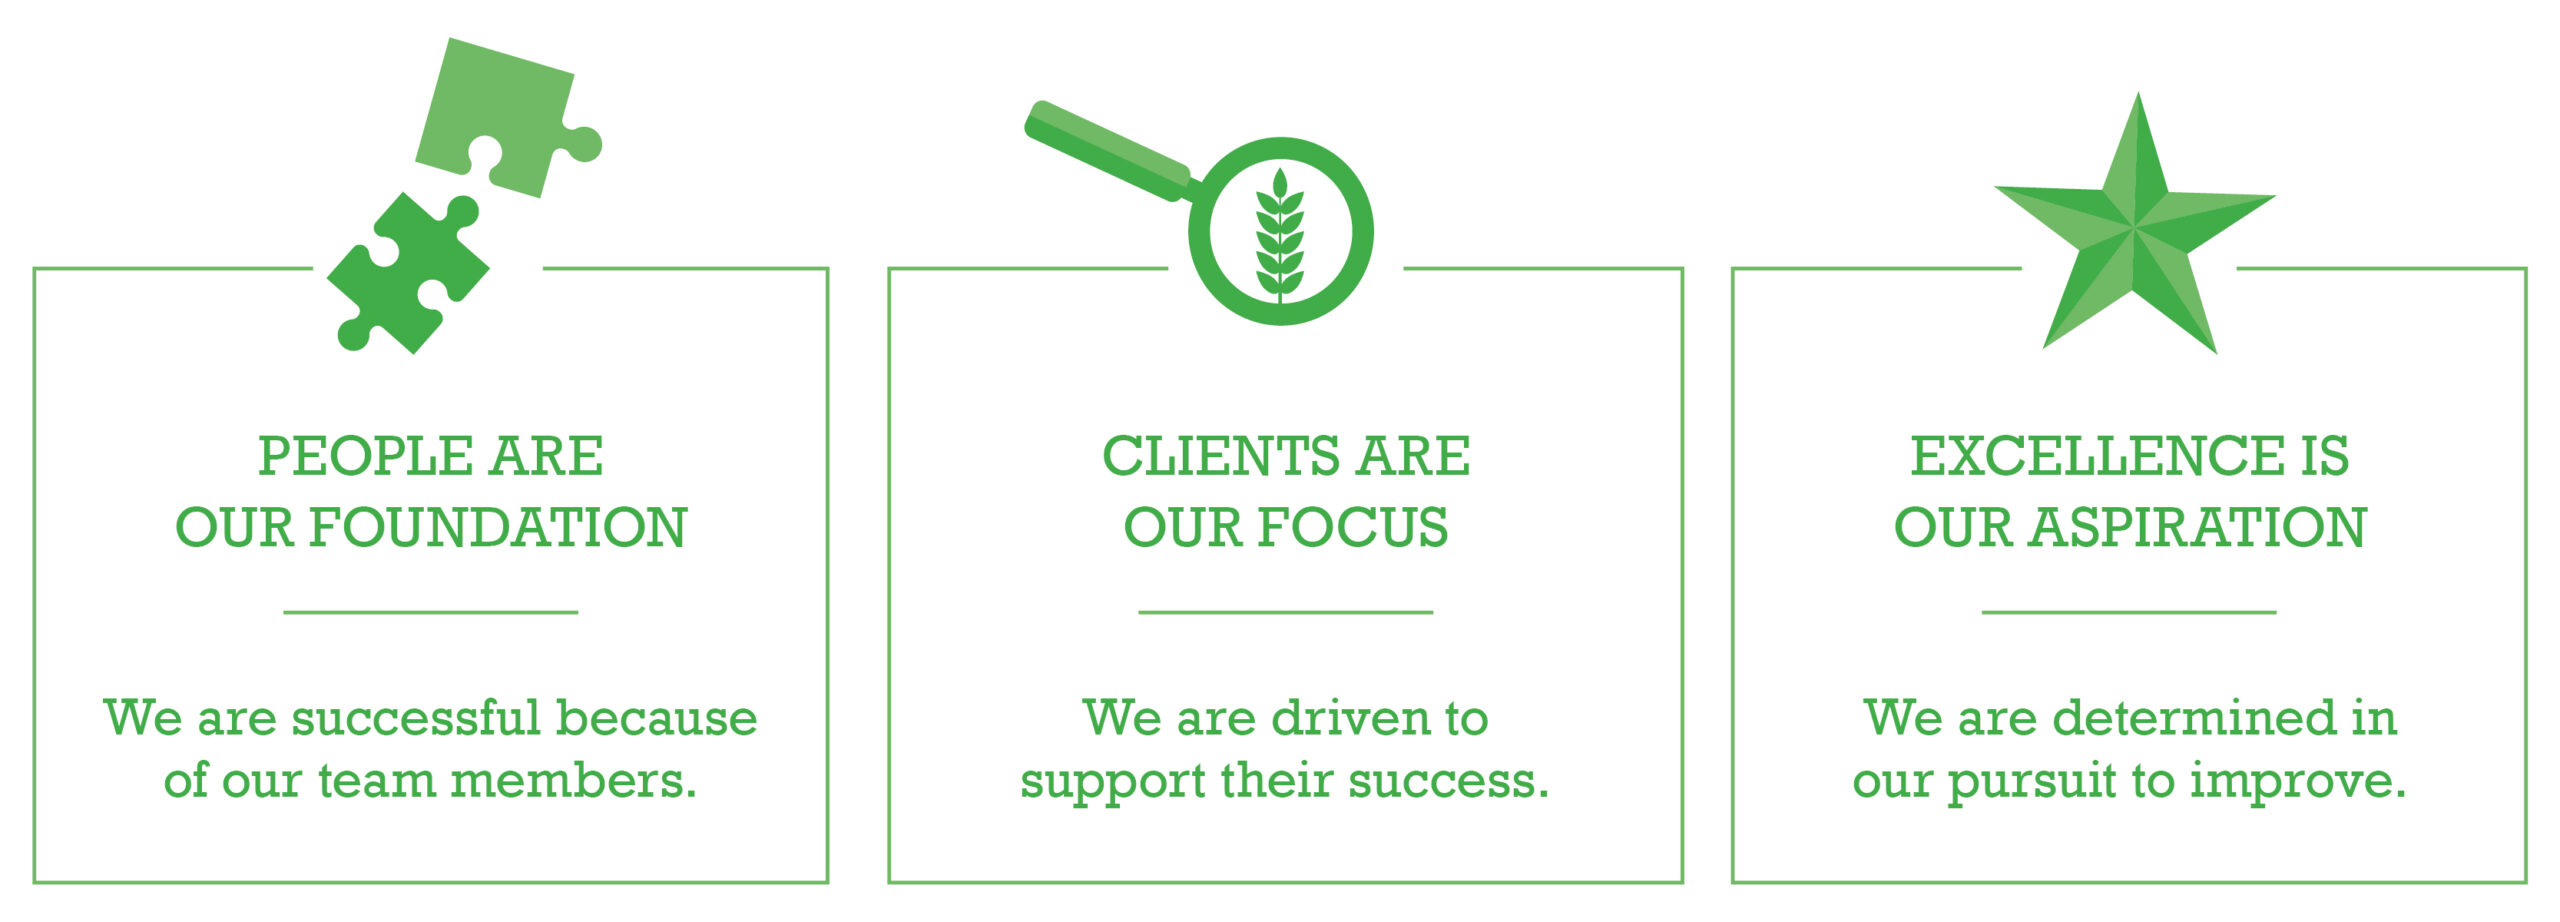 AFSC Values
People are our Foundation: We are successful because of our team members.
Clients are our Focus: We are driven to support their success
Excellence is out Aspiration: We are determined in our pursuit to improve.